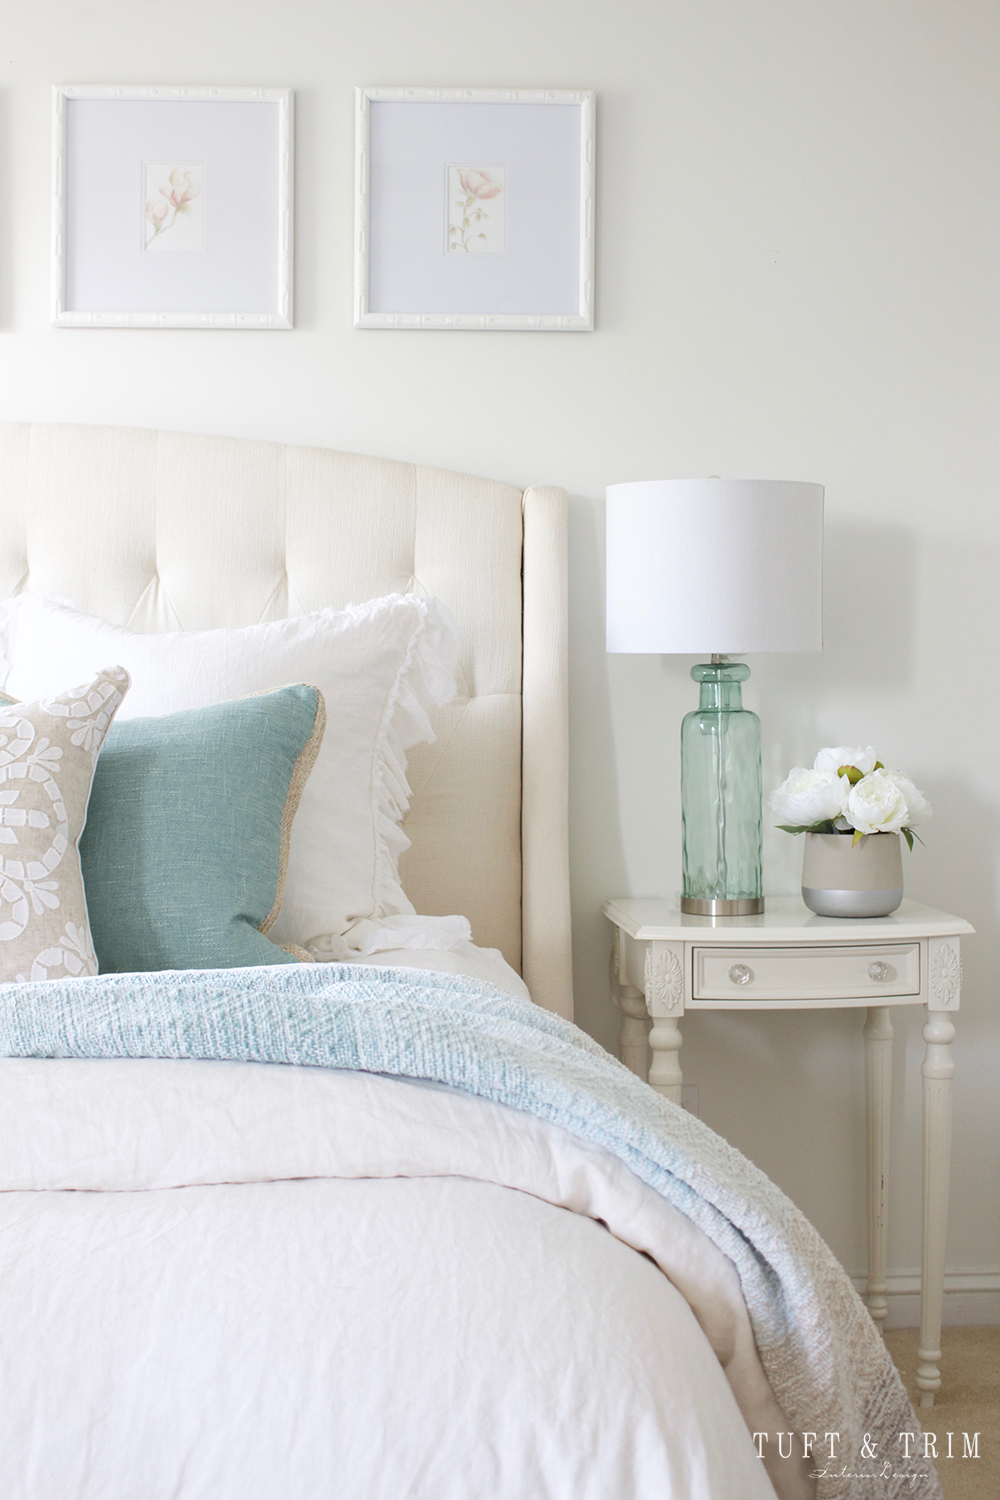 Easy Decorating Tips for Updating Your Bedroom on a Budget - Tuft & Trim